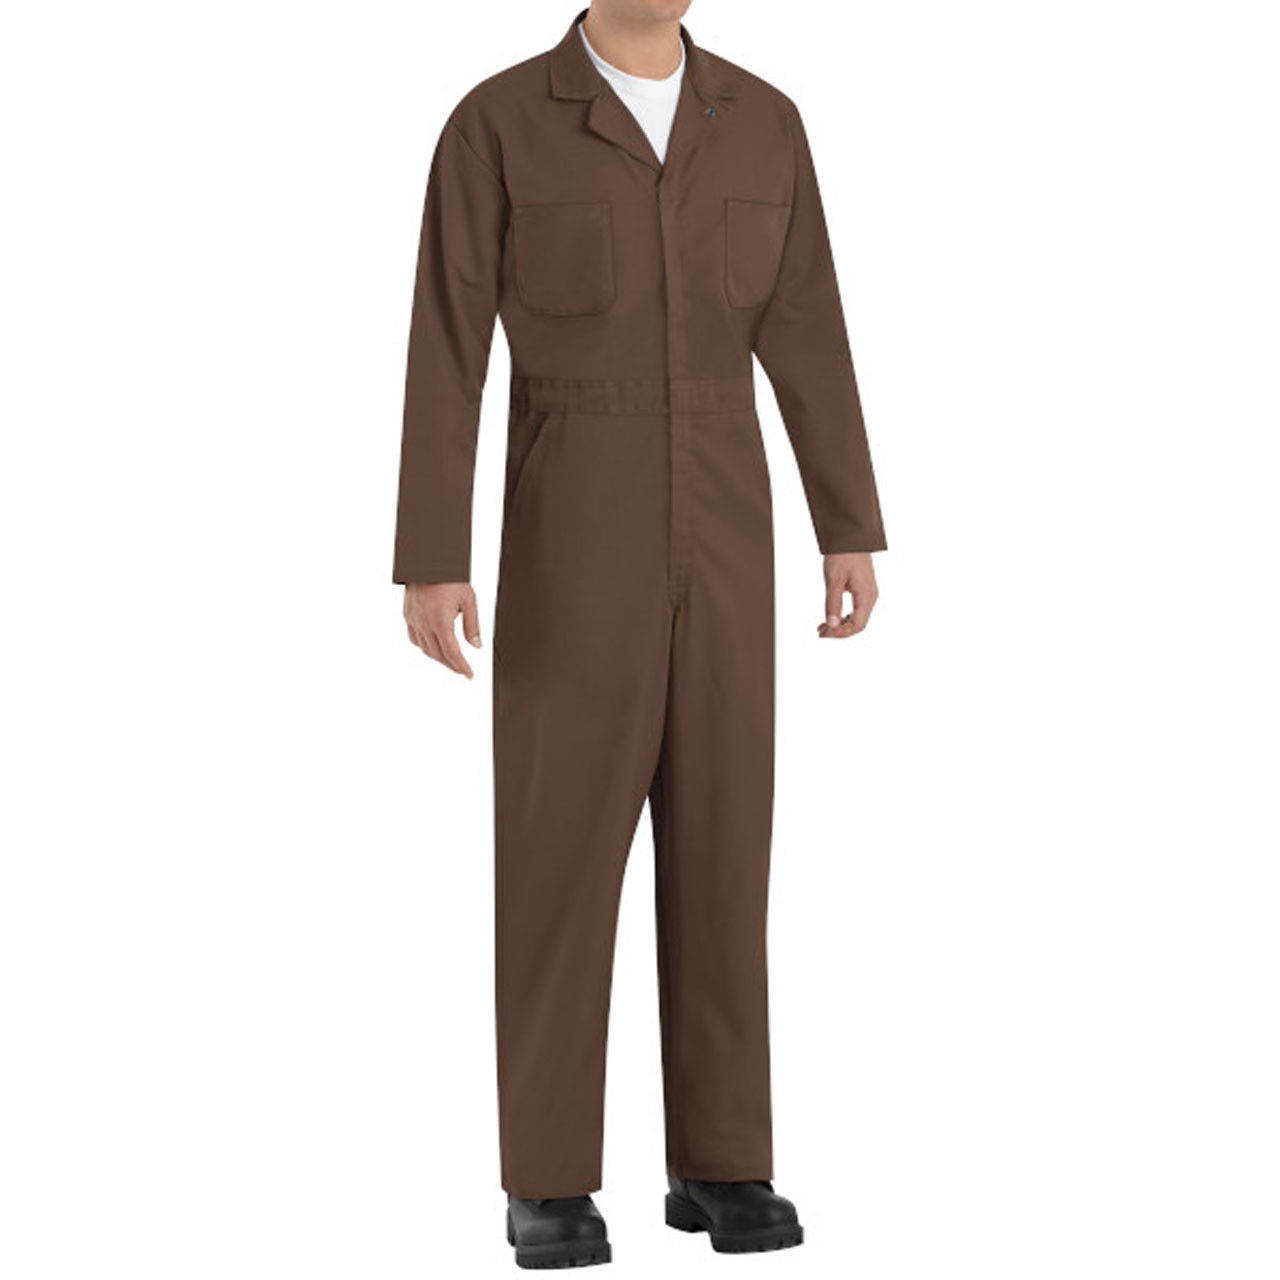 Is it safe to machine wash the brown coveralls?